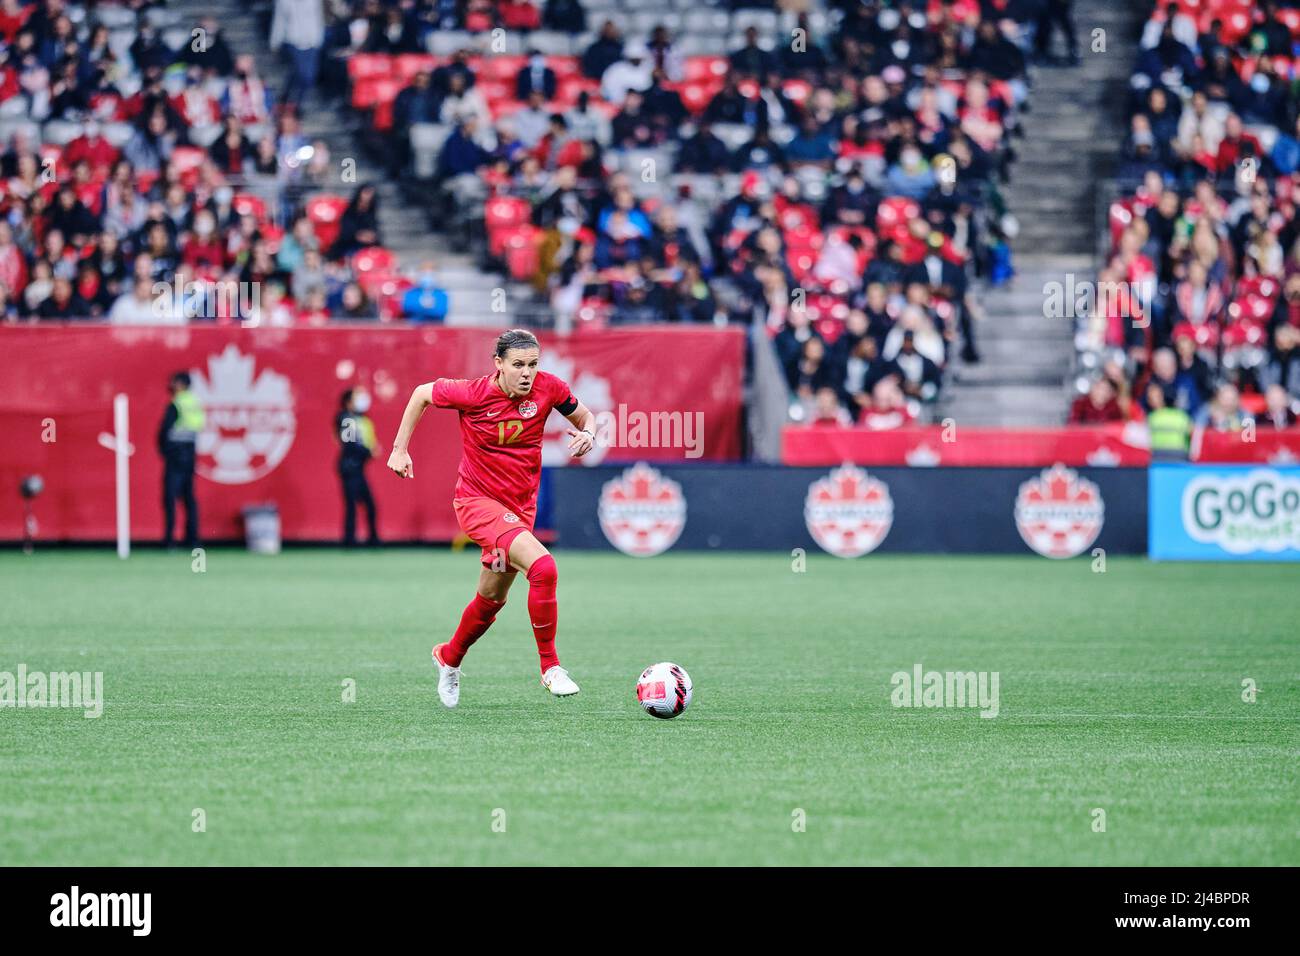 Vancouver, British Columbia, Canada. 8th April, 2022. Christine Sinclair of Team Canada during the first Canada Soccer’s Women’s National Team Celebra Stock Photo